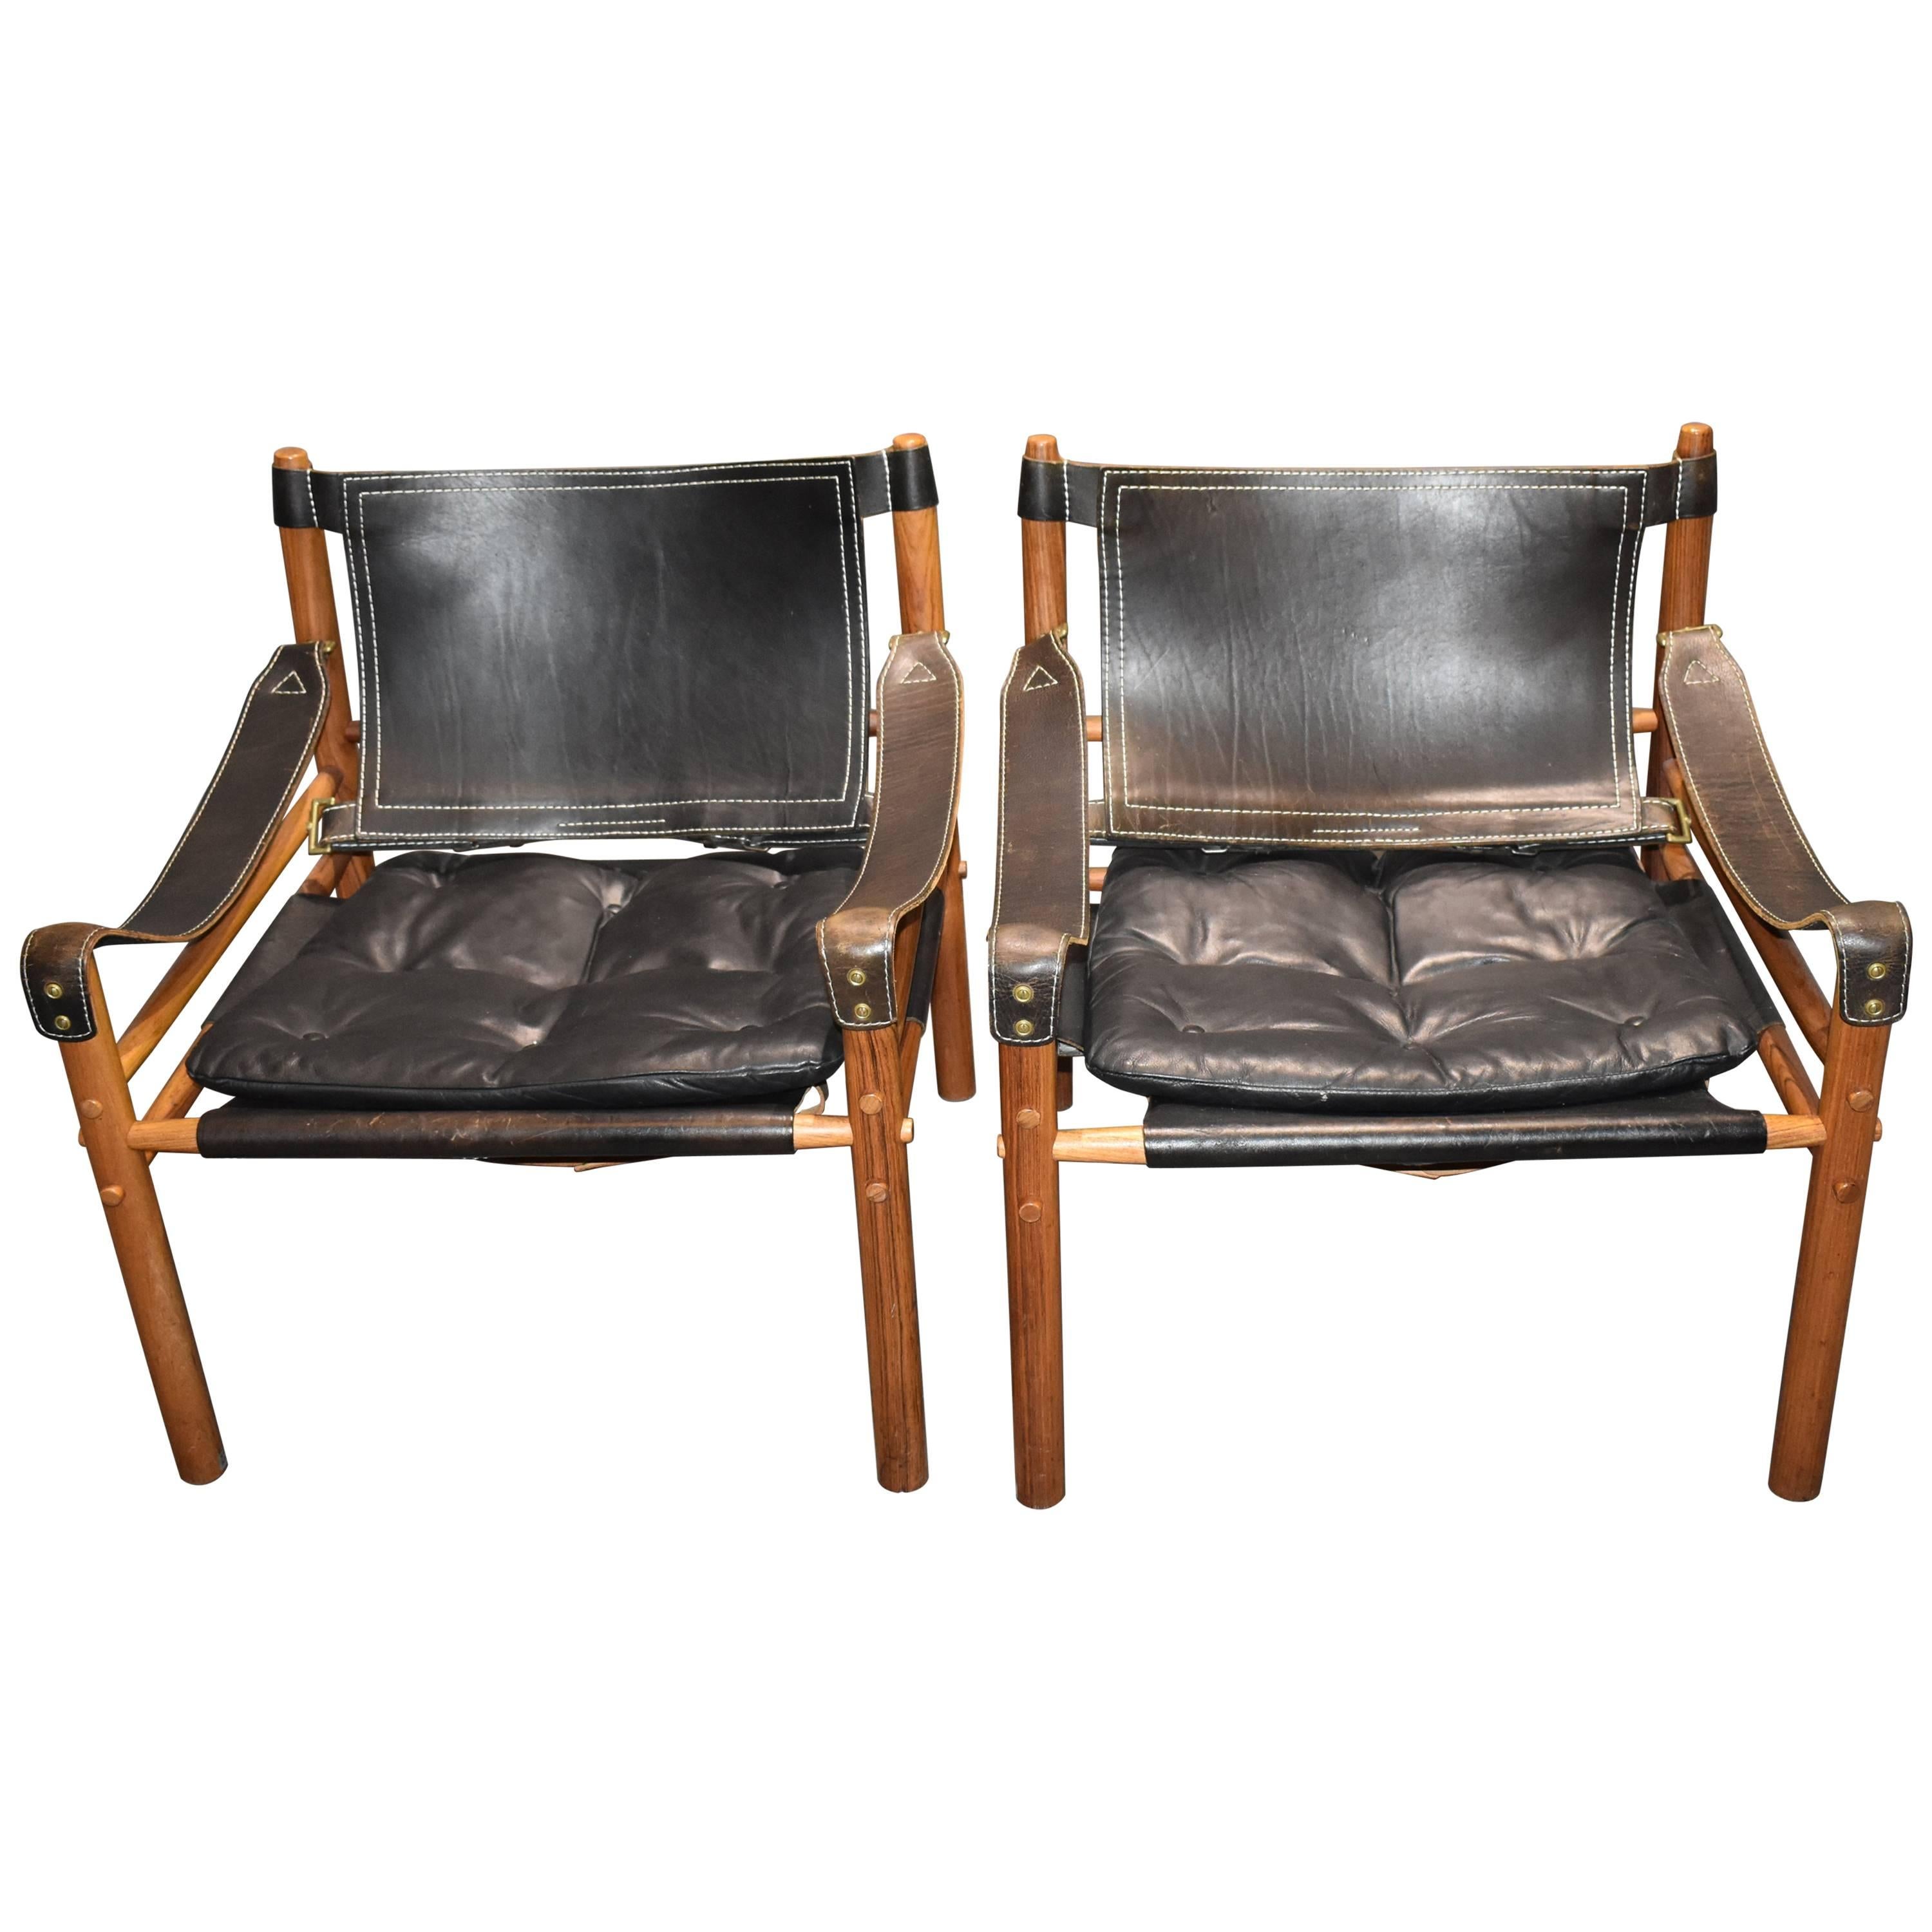 Arne Norell Safari-Lounge Rosewood Chairs Model Sirocco, 1960s For Sale